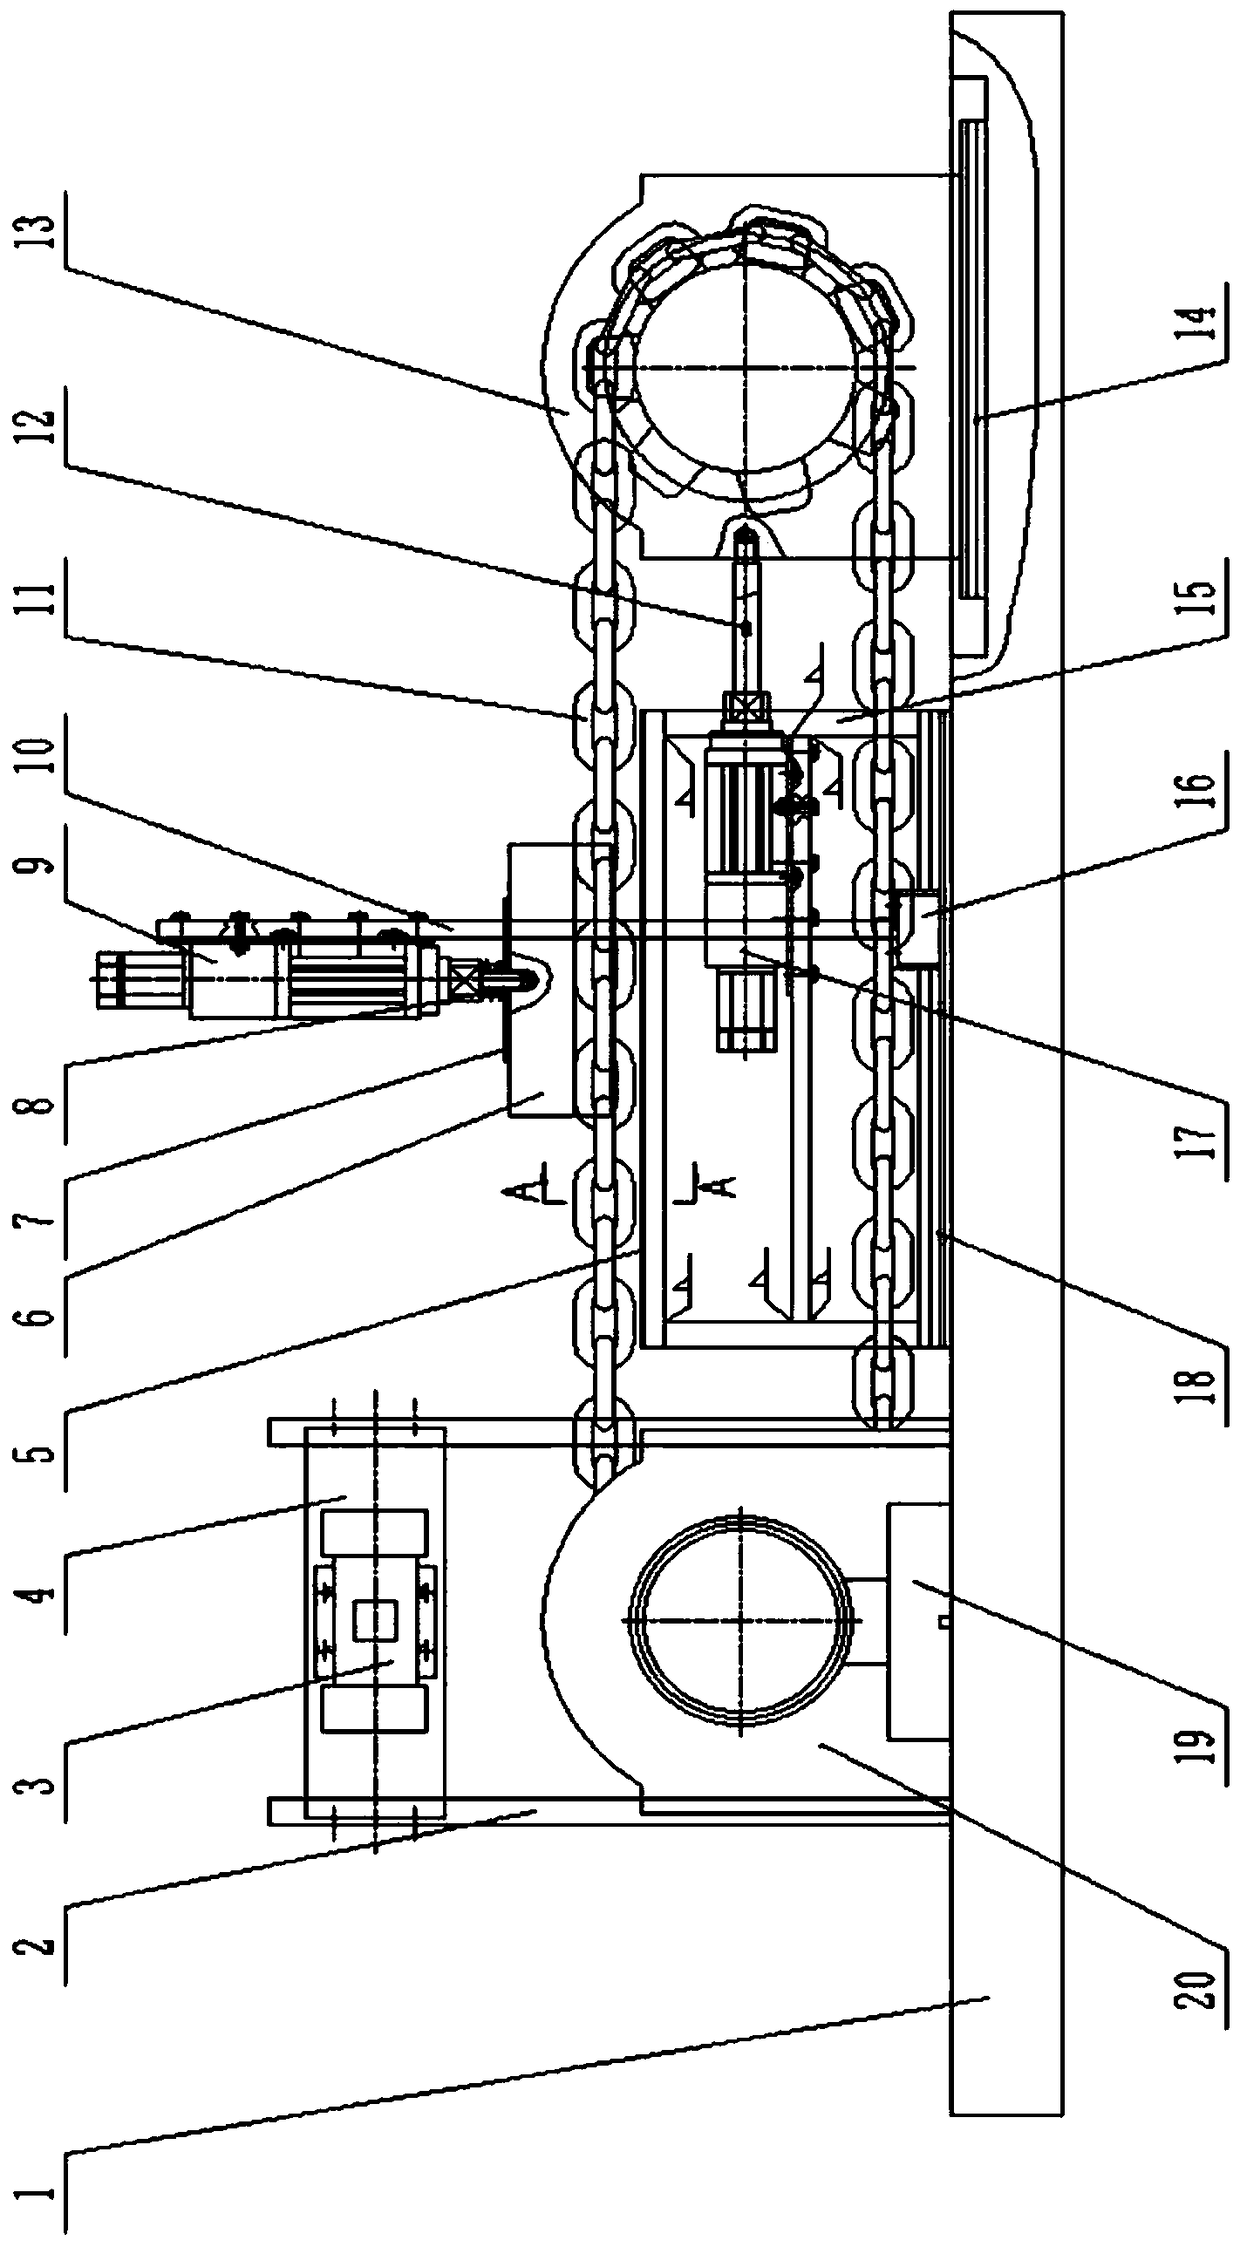 Device and method for monitoring friction fatigue of heavy-duty scraper conveyor sprocket under vibration shock